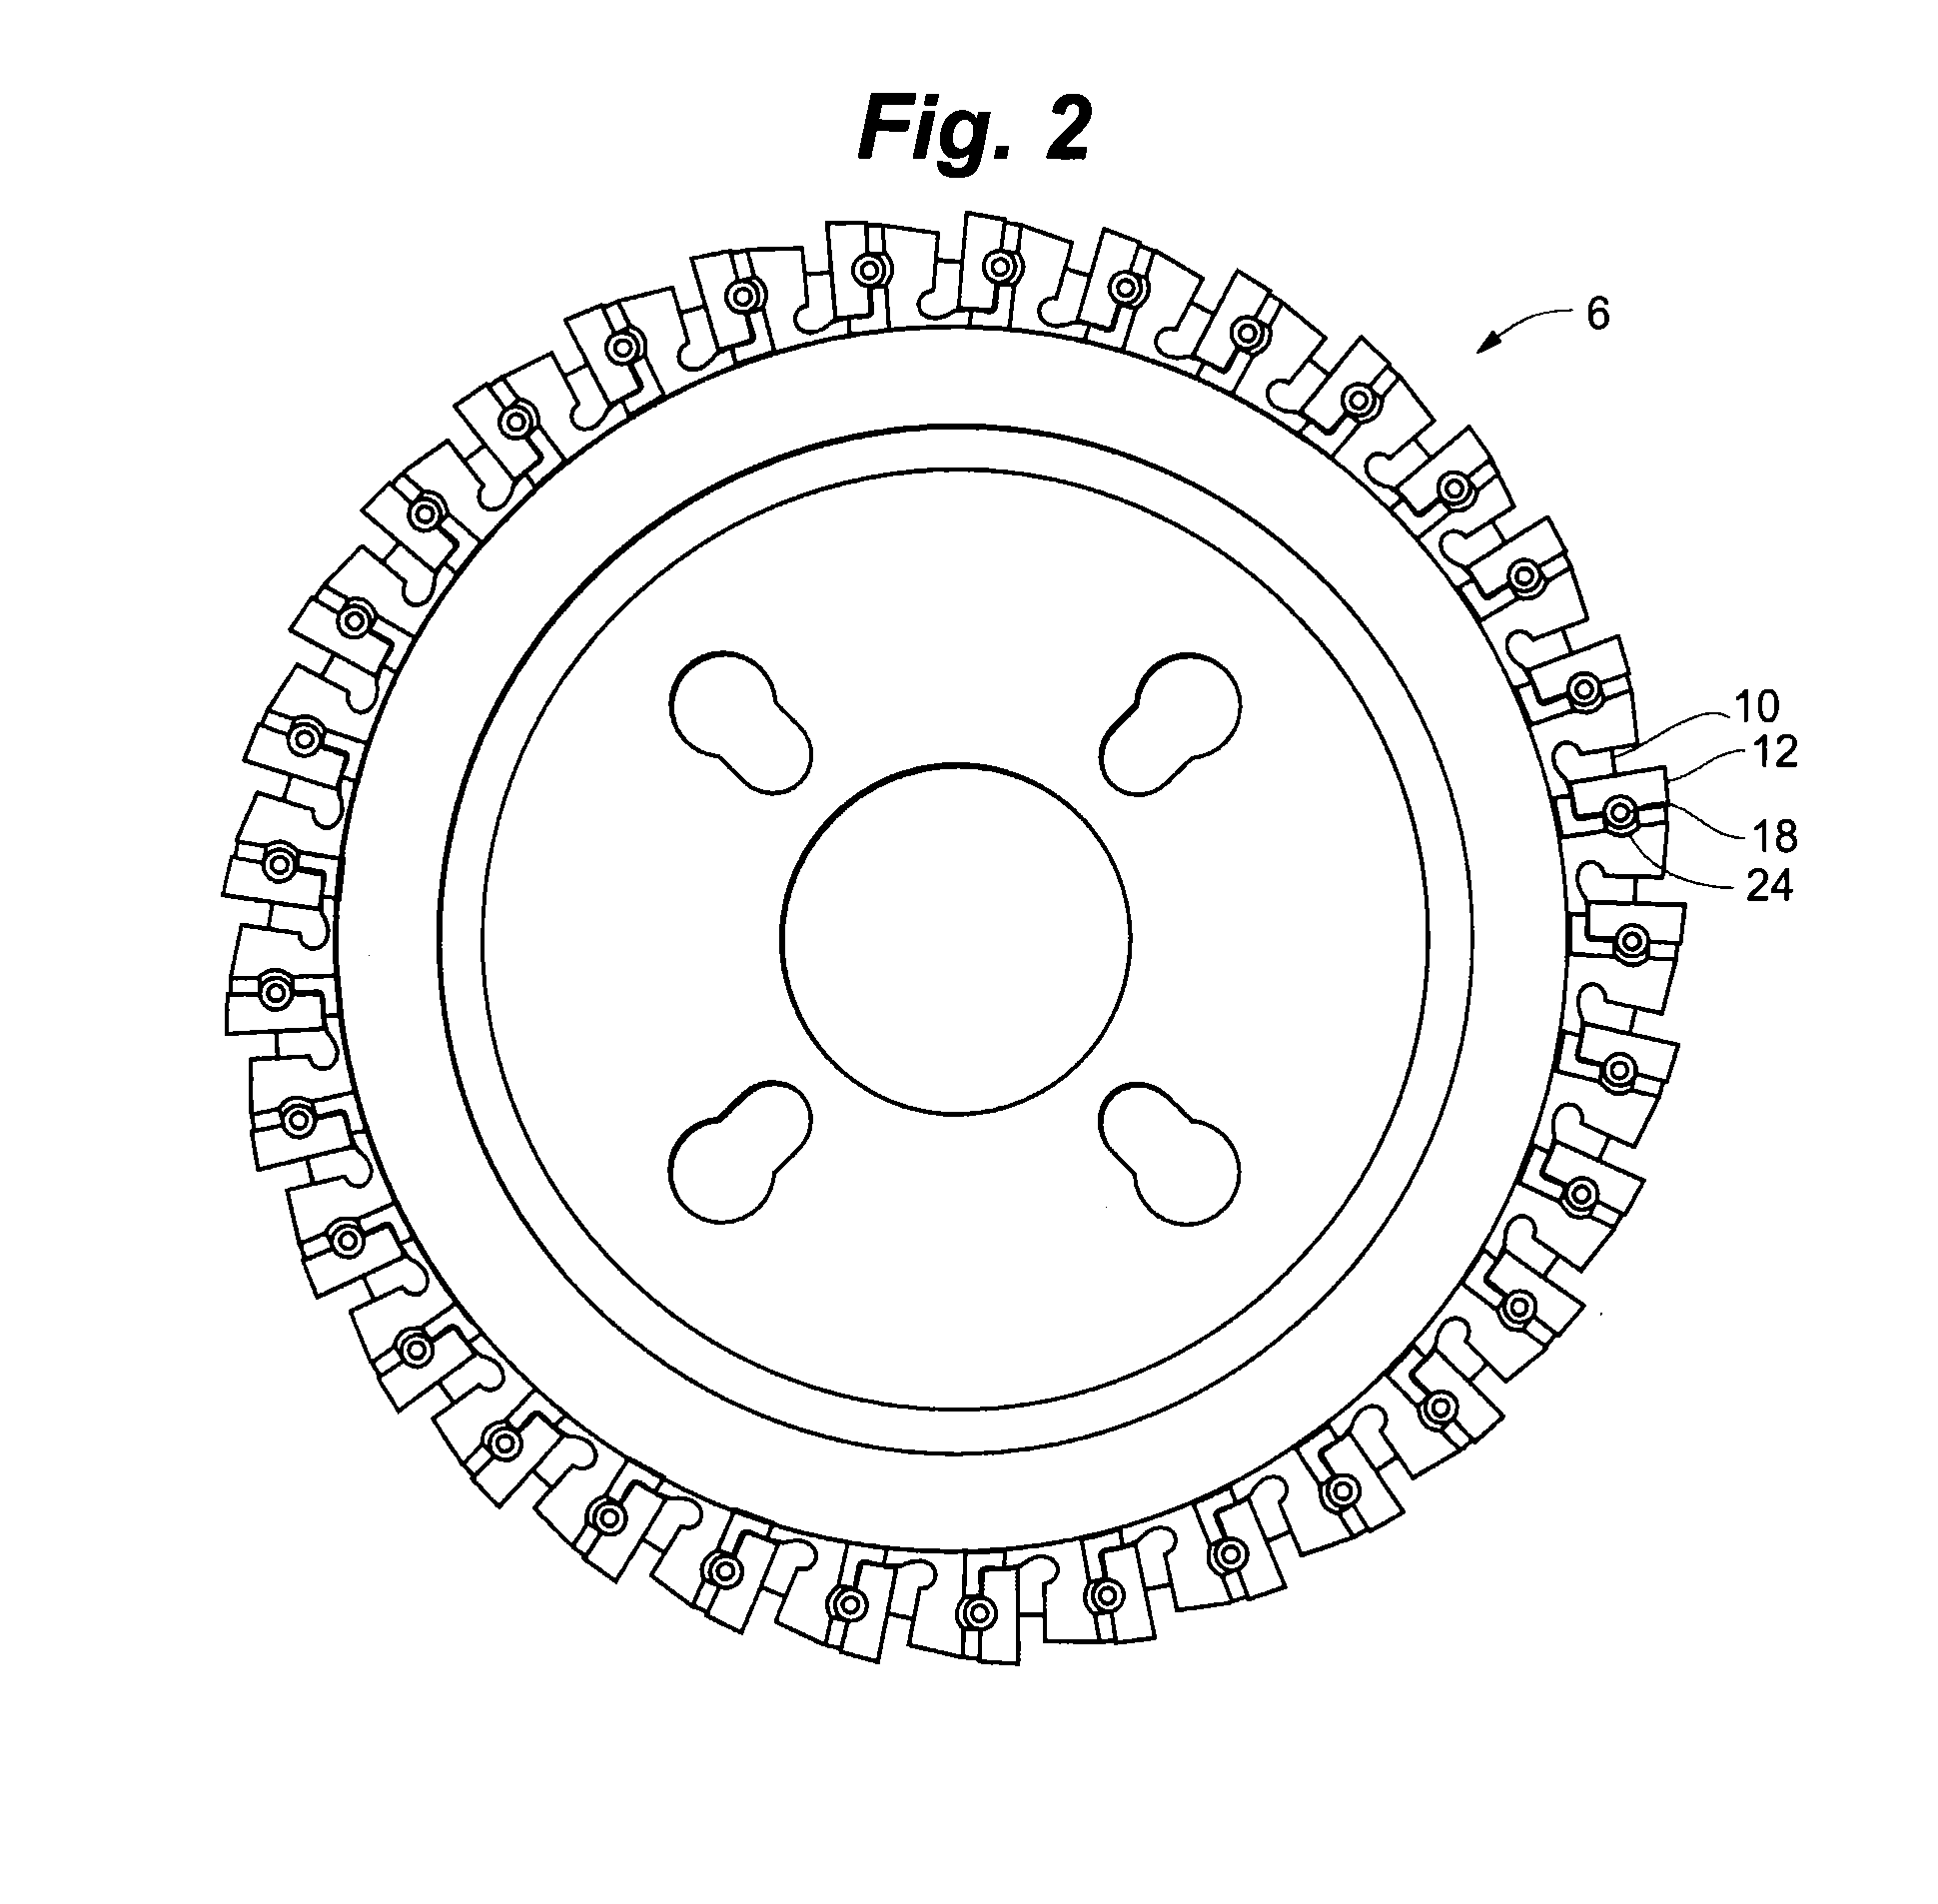 Method and apparatus for milling of railroad track